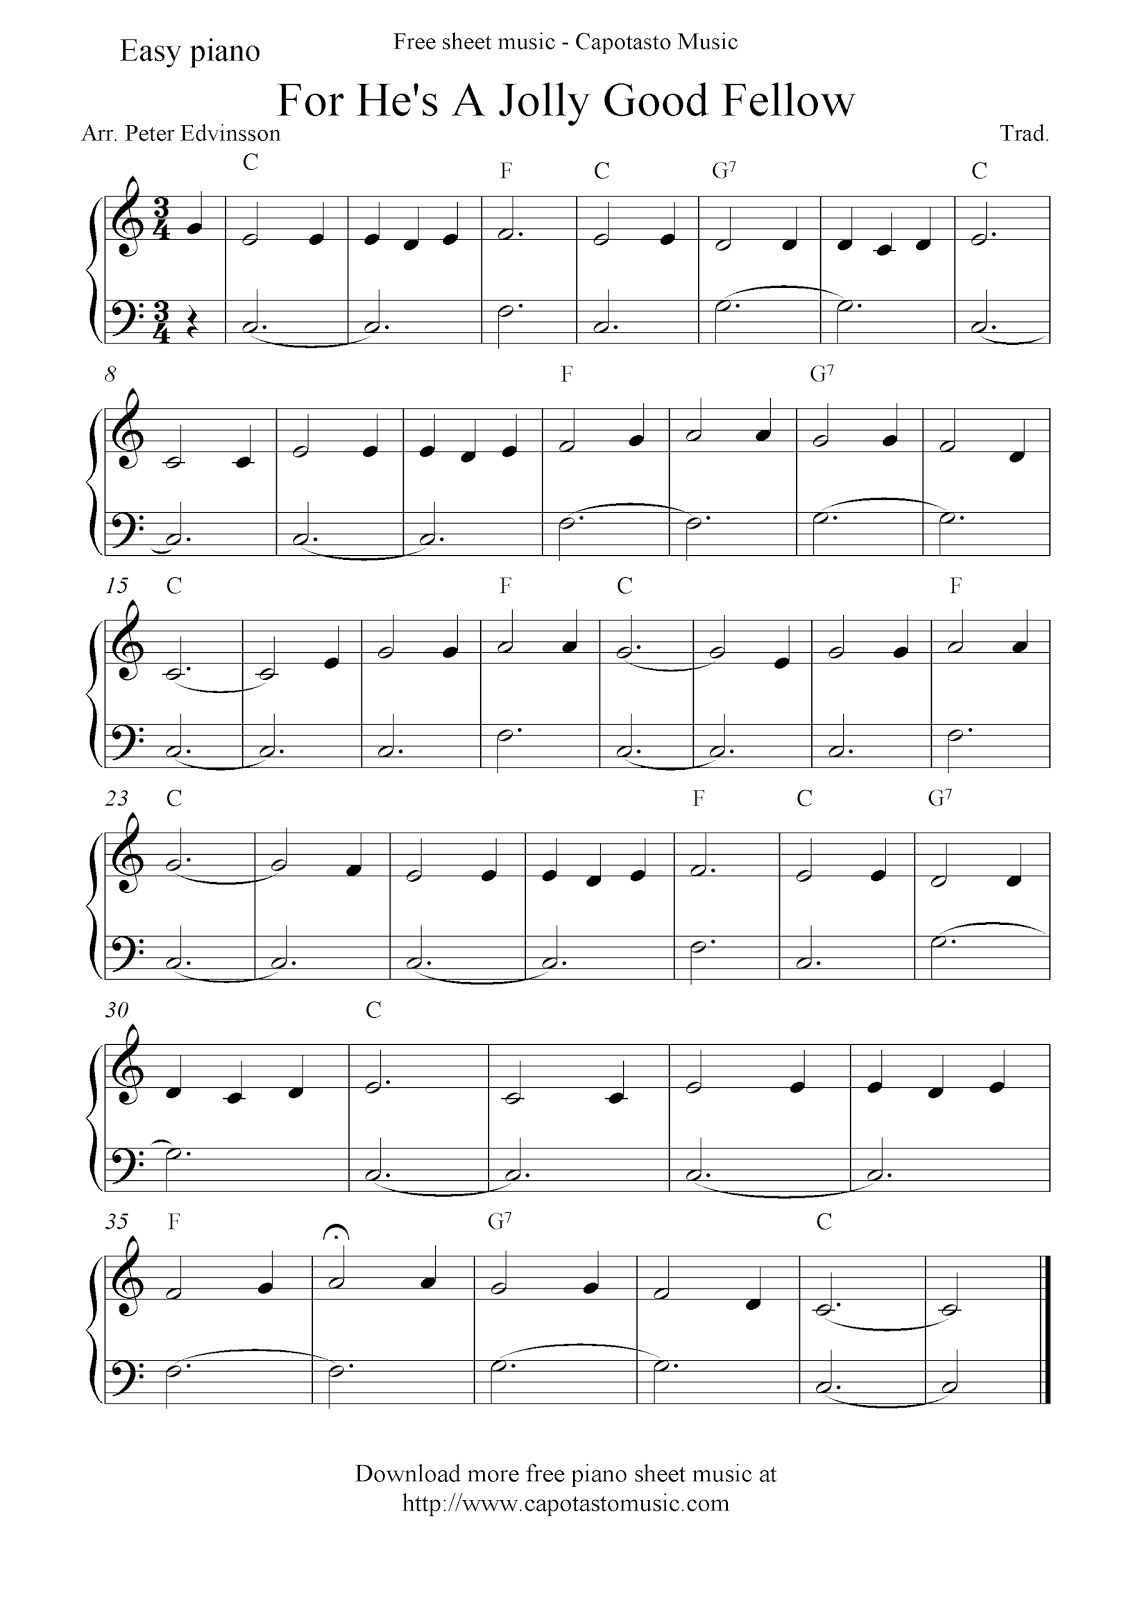 free-printable-sheet-music-for-he-s-a-jolly-good-fellow-free-easy